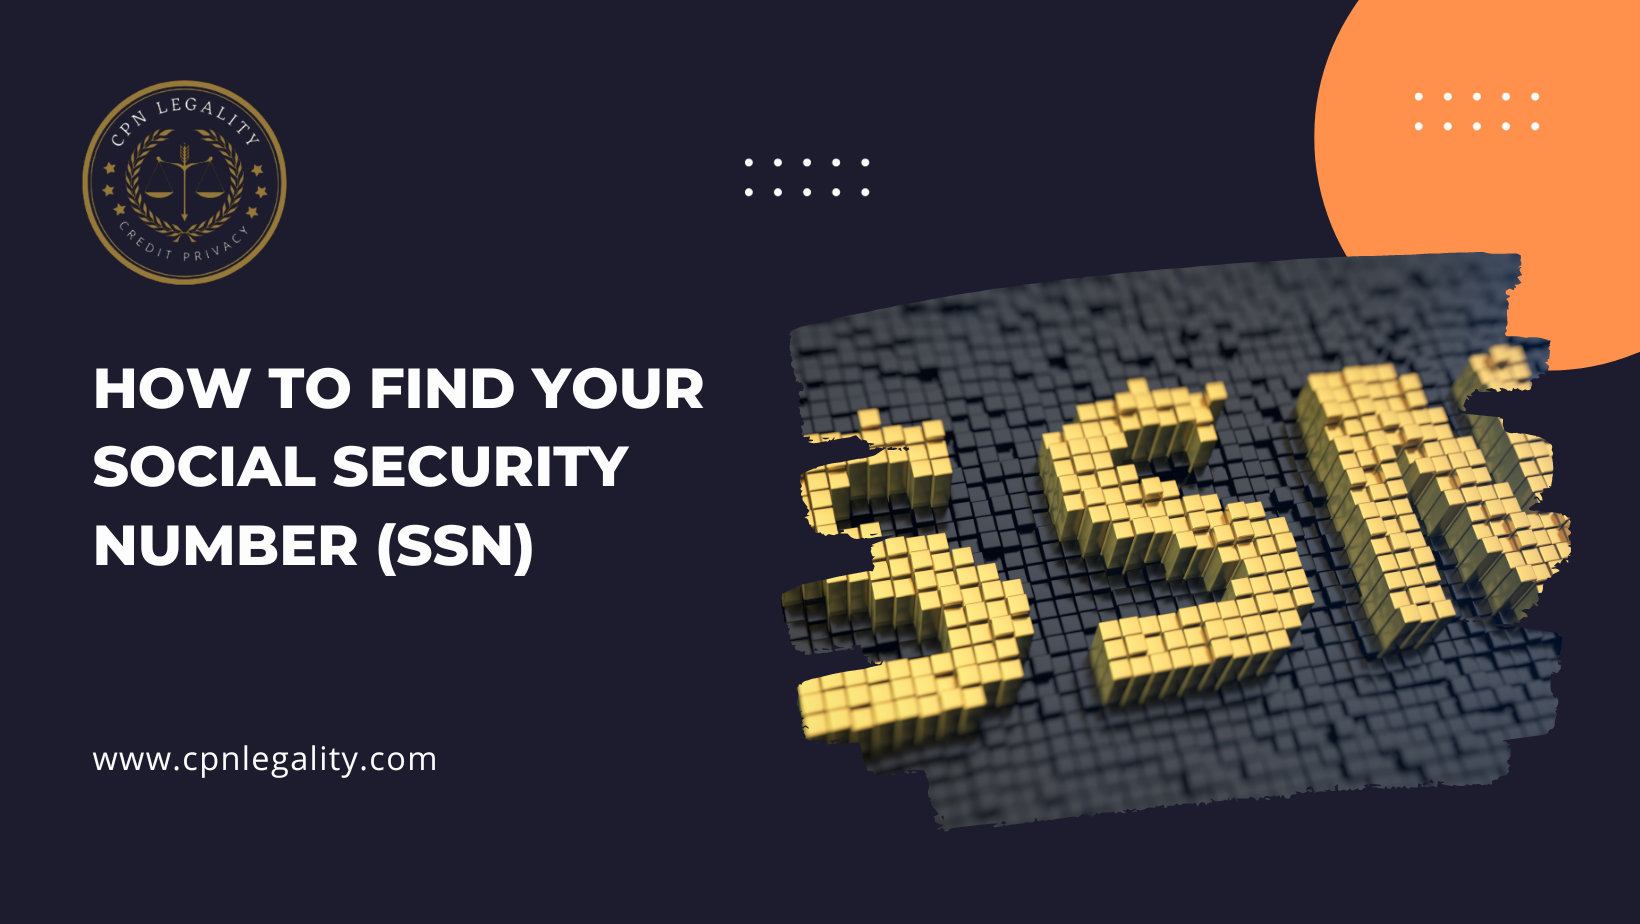 How to Find Your Social Security Number (SSN)